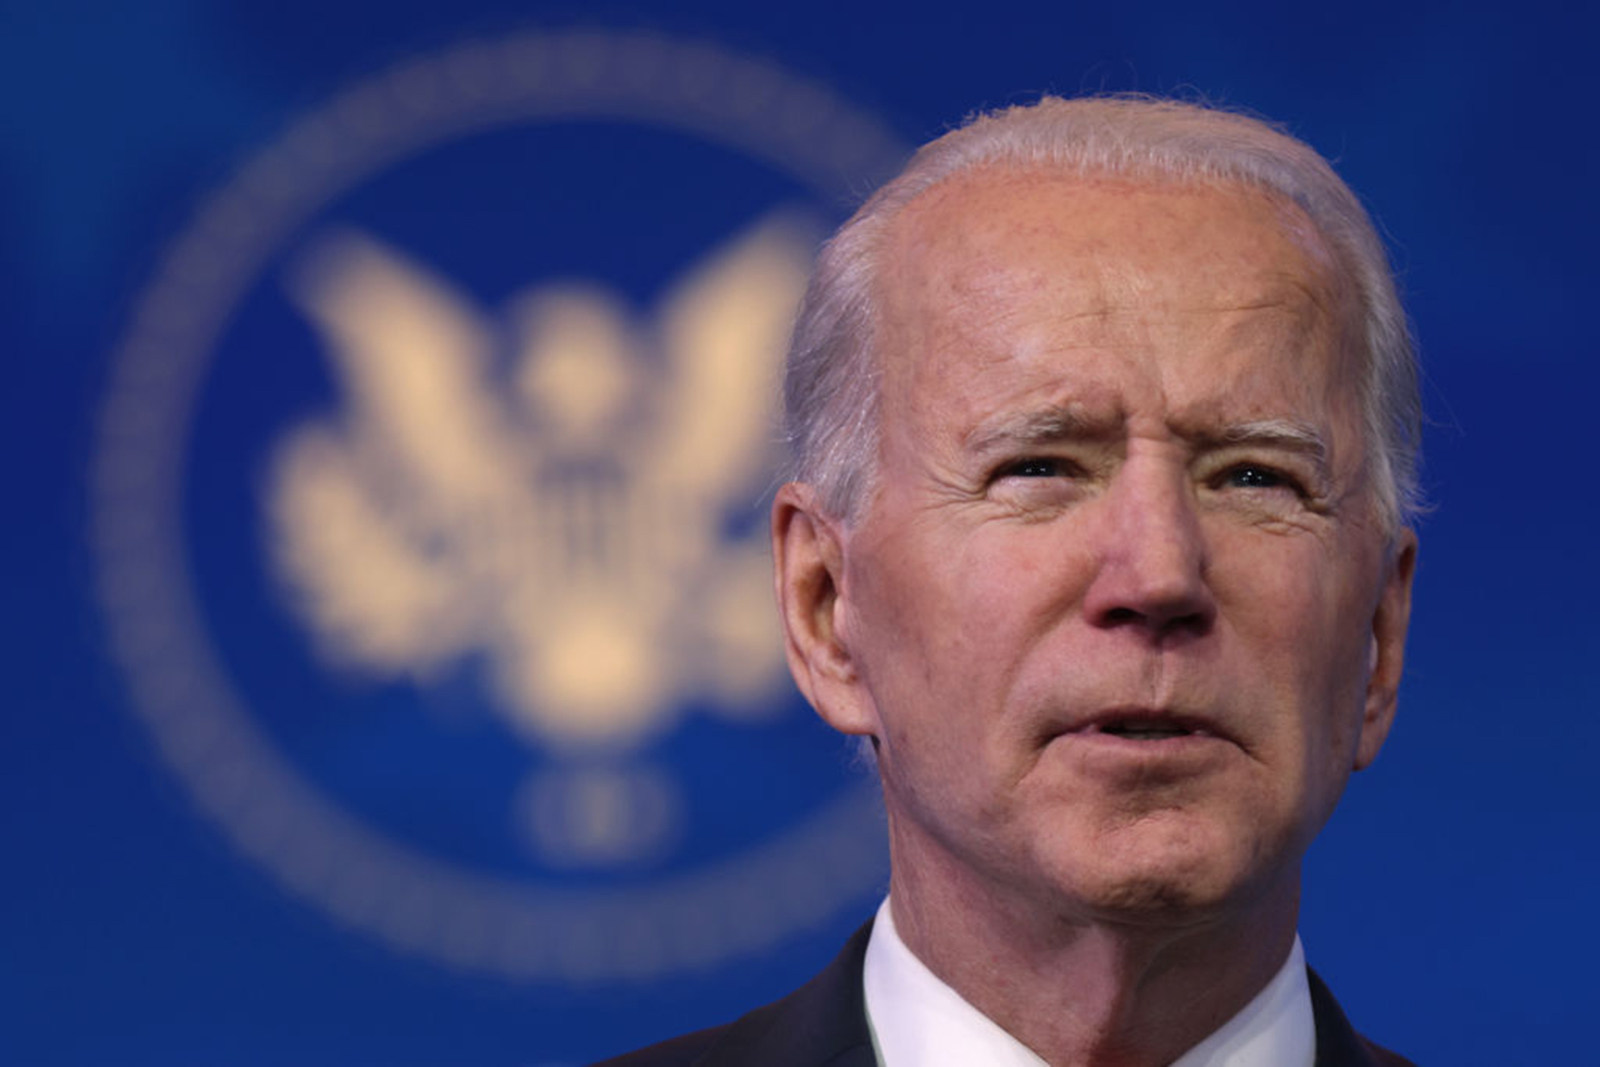 The Biden administration has weaponised the US dollar by imposing financial sanctions on others, including China. Photo: Getty Images / TNS